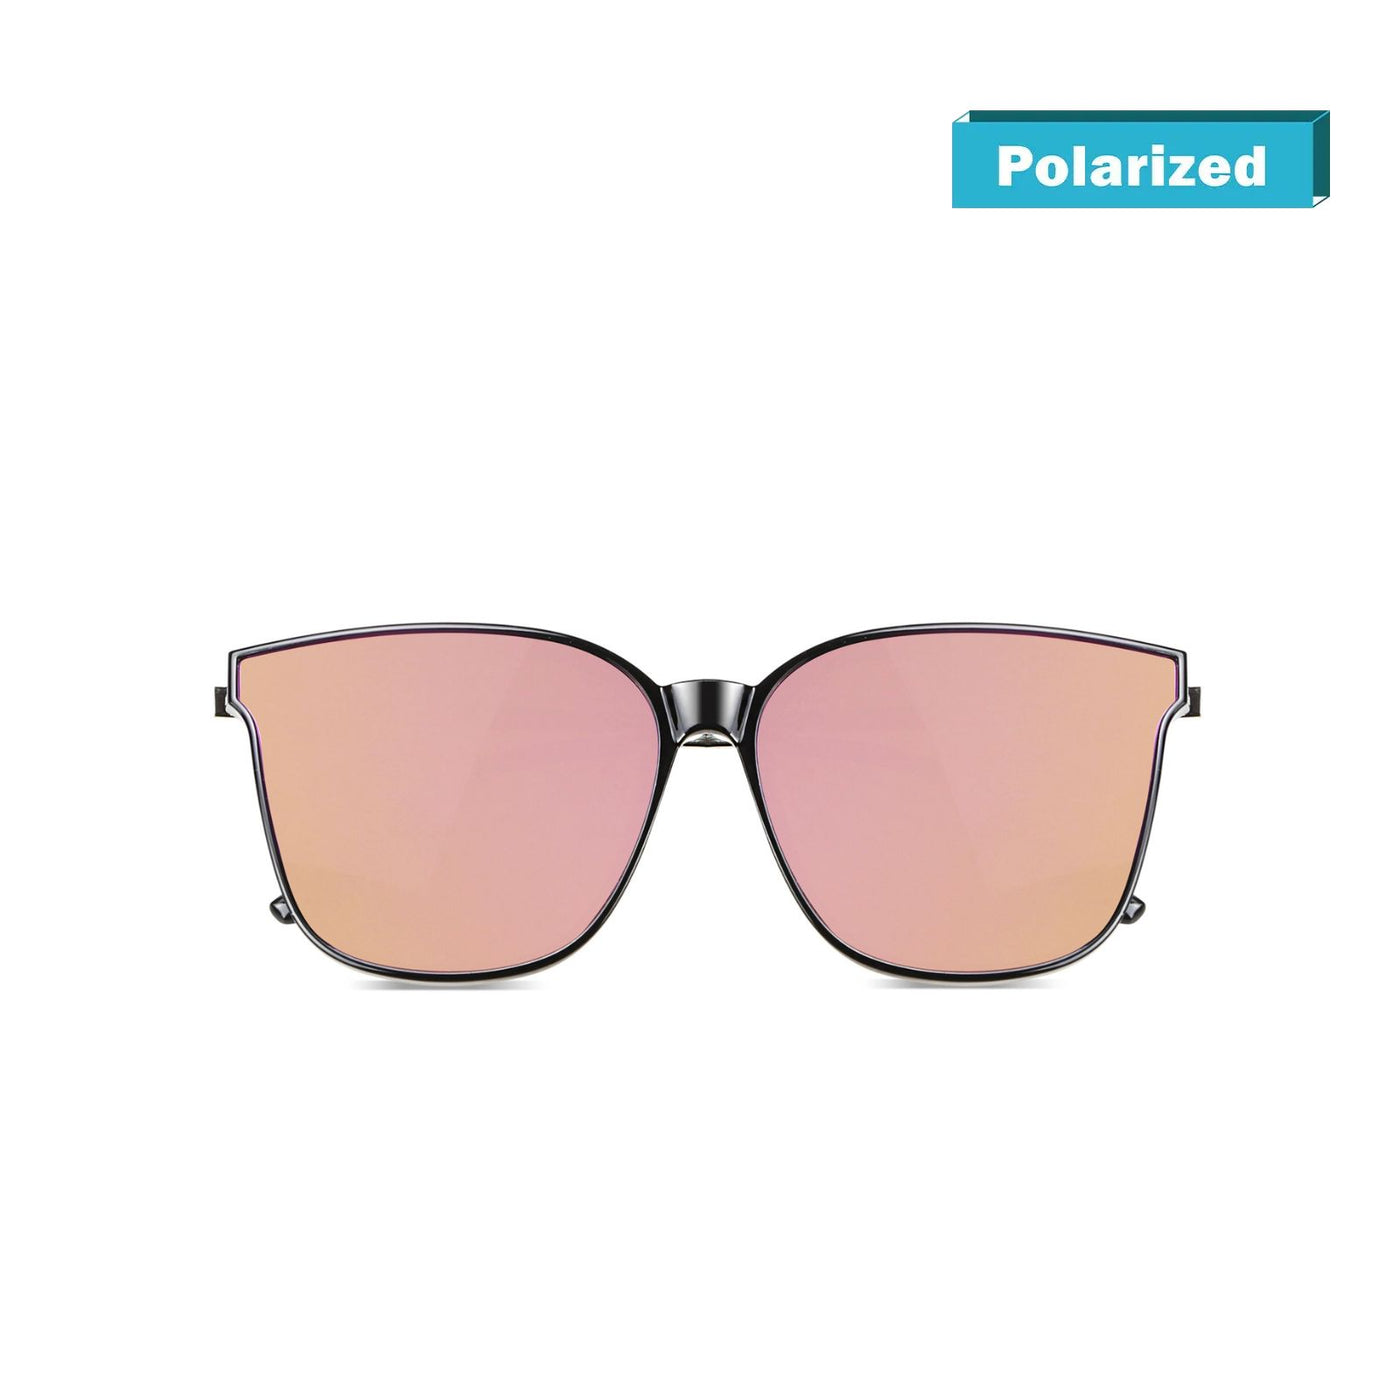 DUCO Vintage Retro Round Sunglasses for Women Men with UV Protection Fashion for Beaches W016